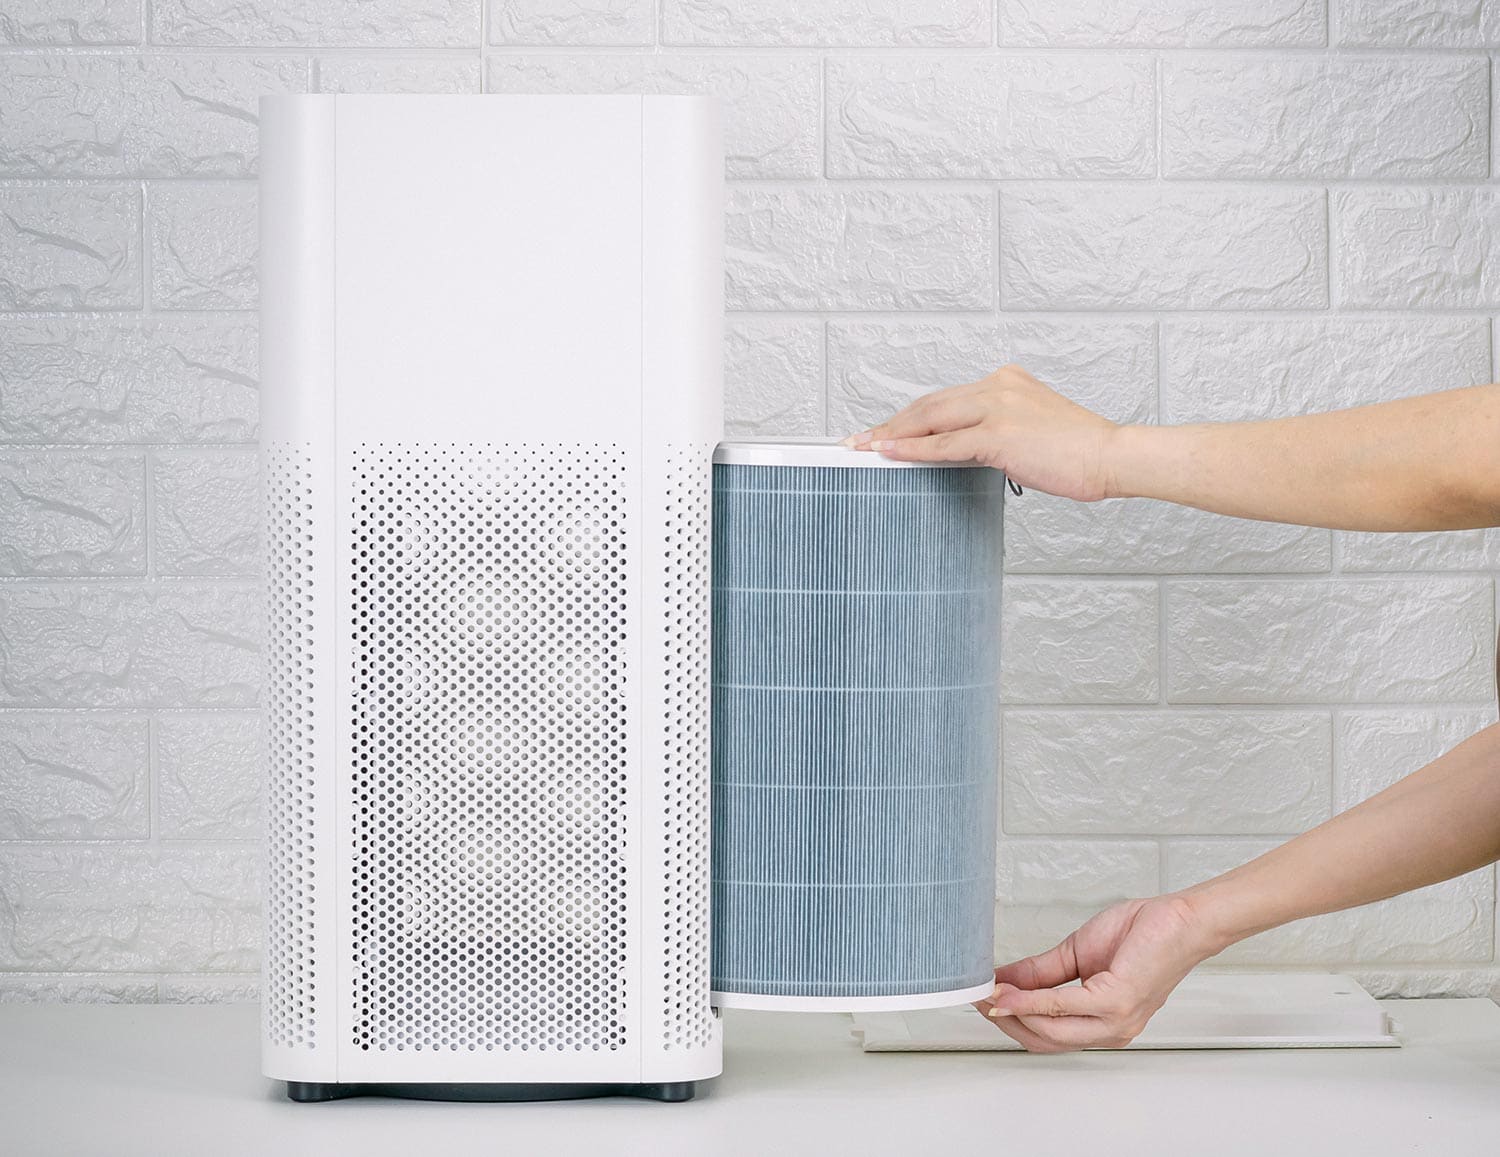 Replace the air purifier filter in the house